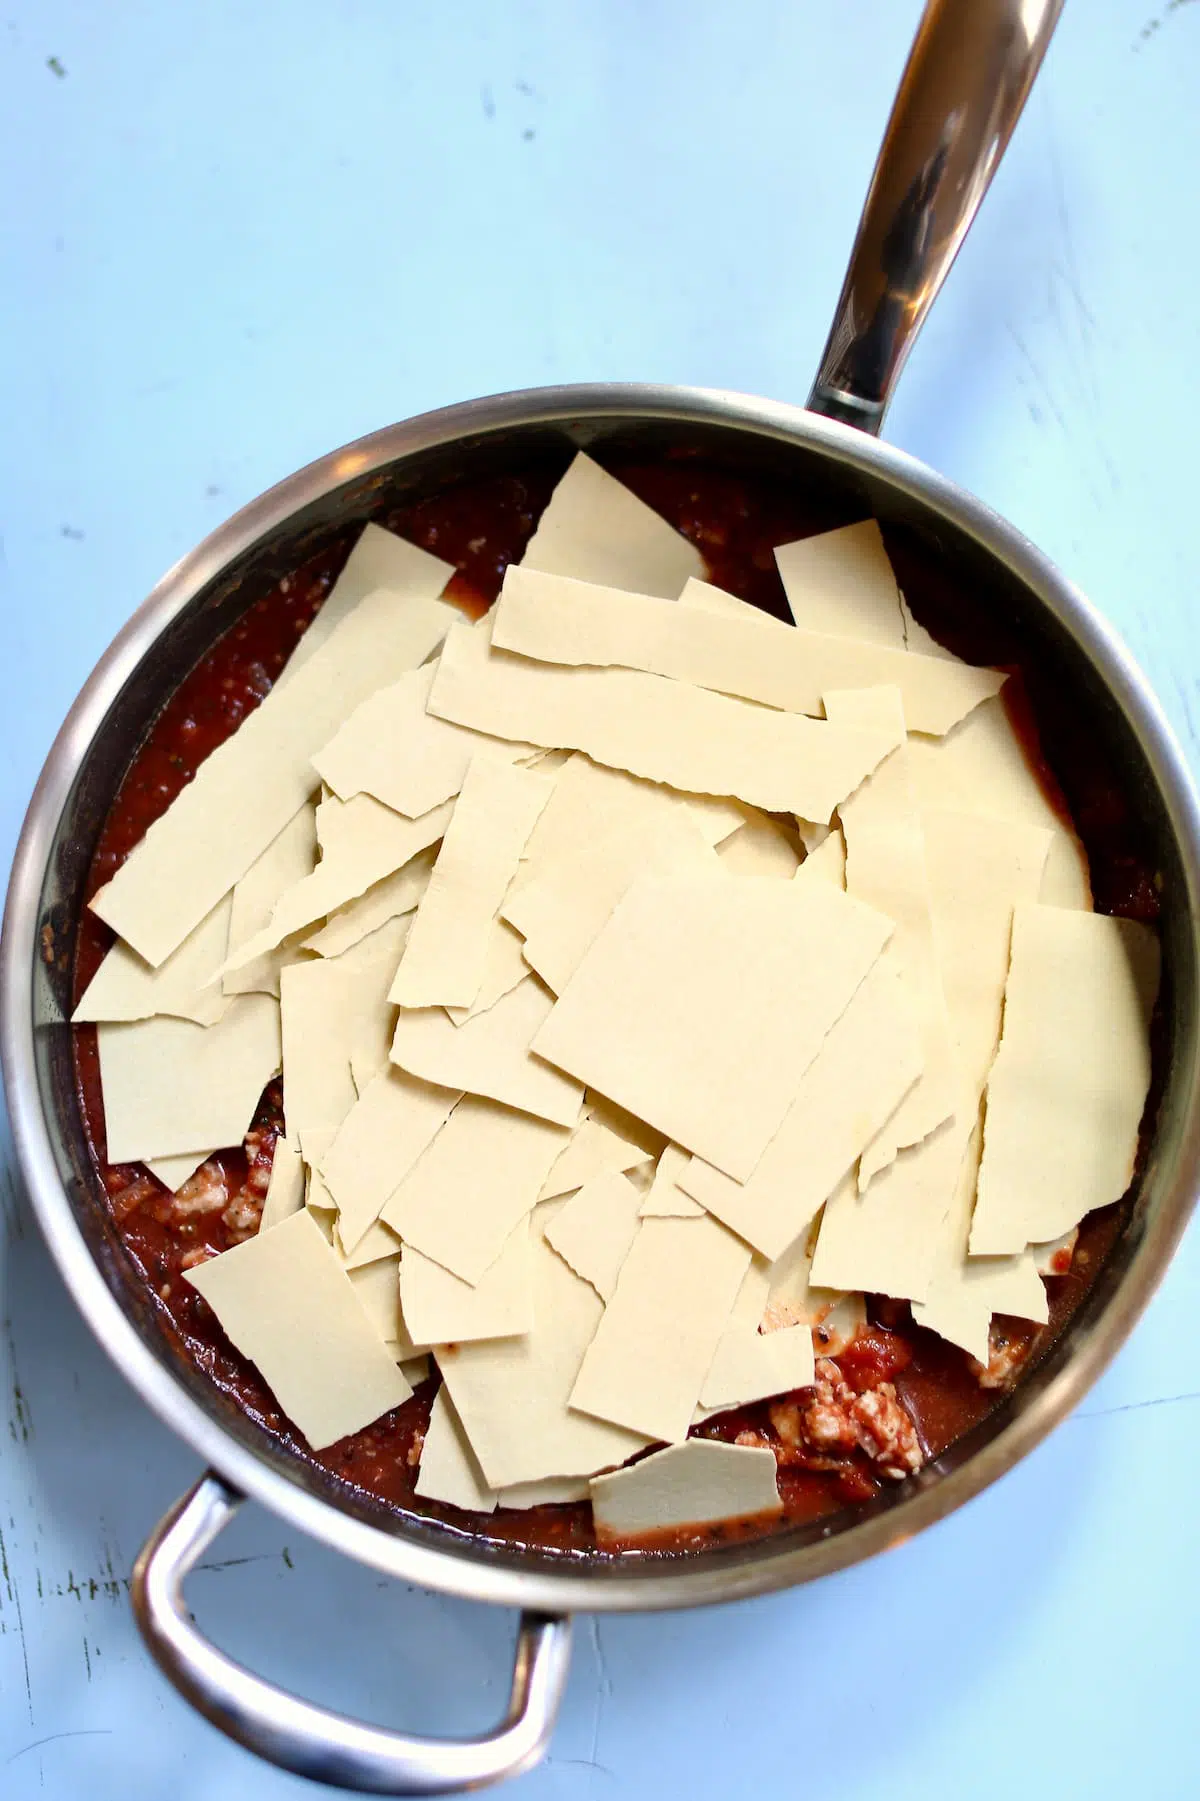 a skillet of dried pasta noodles.